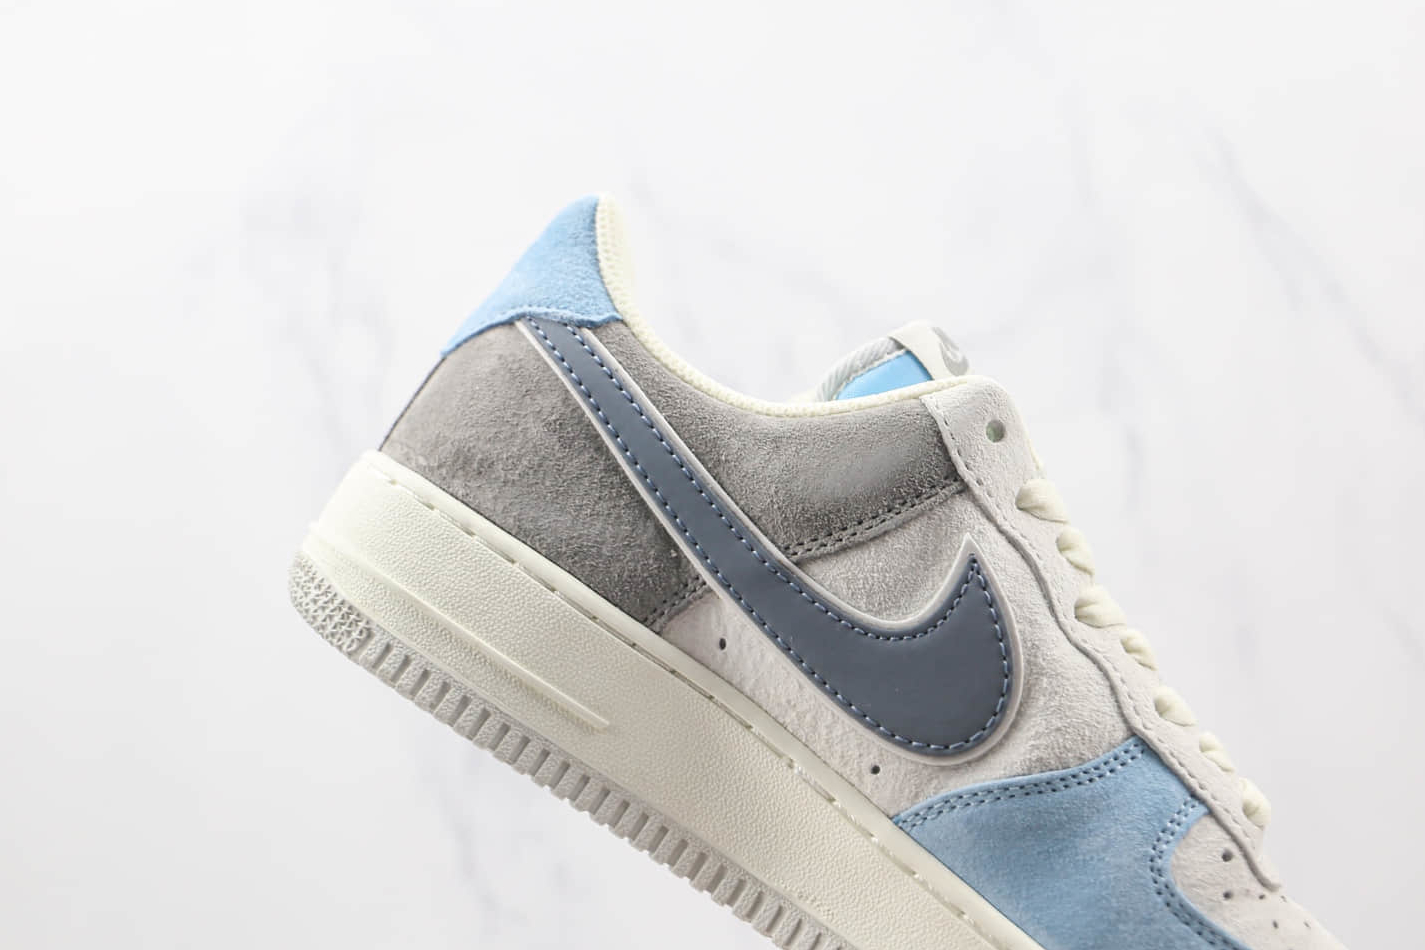 Nike Air Force 1 Low White Grey Navy Blue LZ6699-523 Shoes - Premium Quality and Style